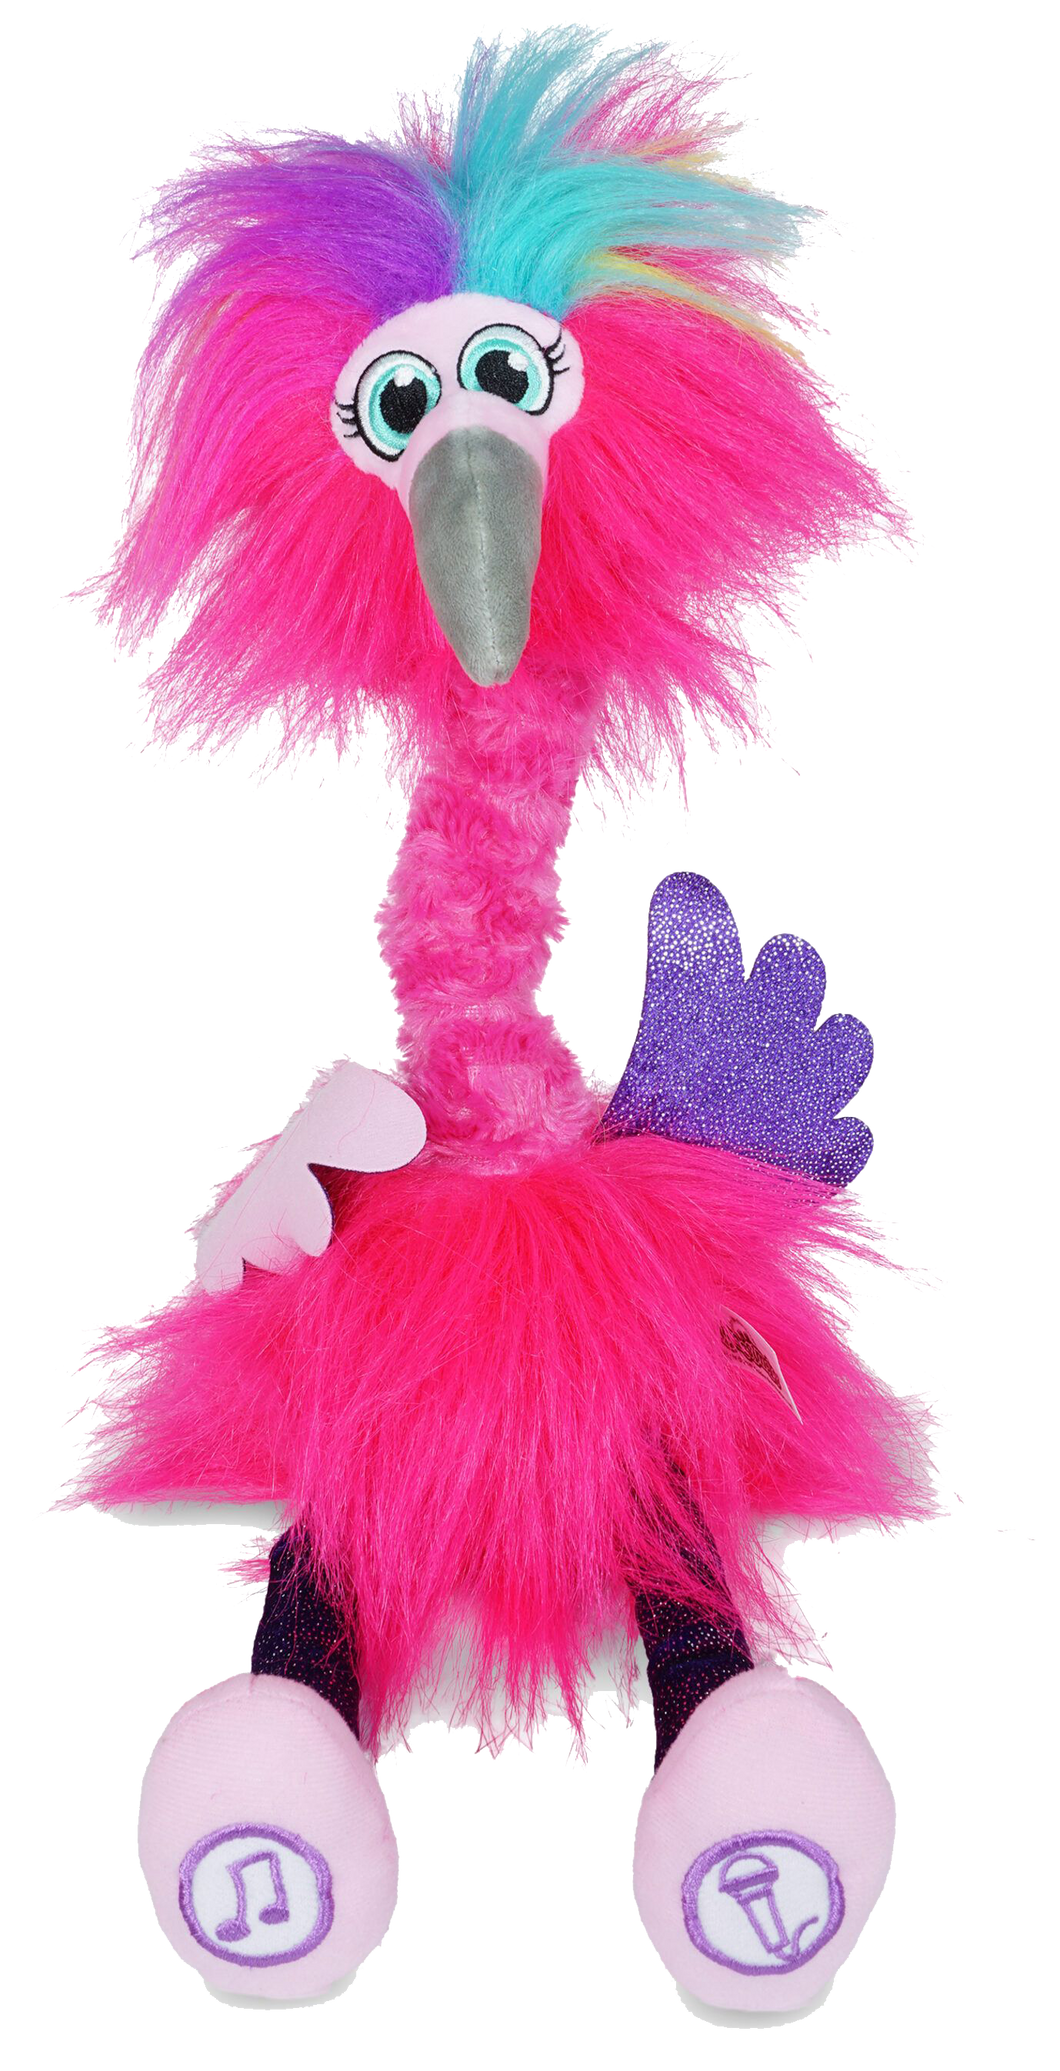 Flossi the Flamingo is the fantastically Sassi Flamingo that your little one will love to dance and sing with.  She dances and swirls when you press one of her feet.  Press and hold the other foot to talk to her, it will record your voice and she will talk back, so much fun for the whole family, your little one will be laughing their head off when they get to Floss with Flossi.